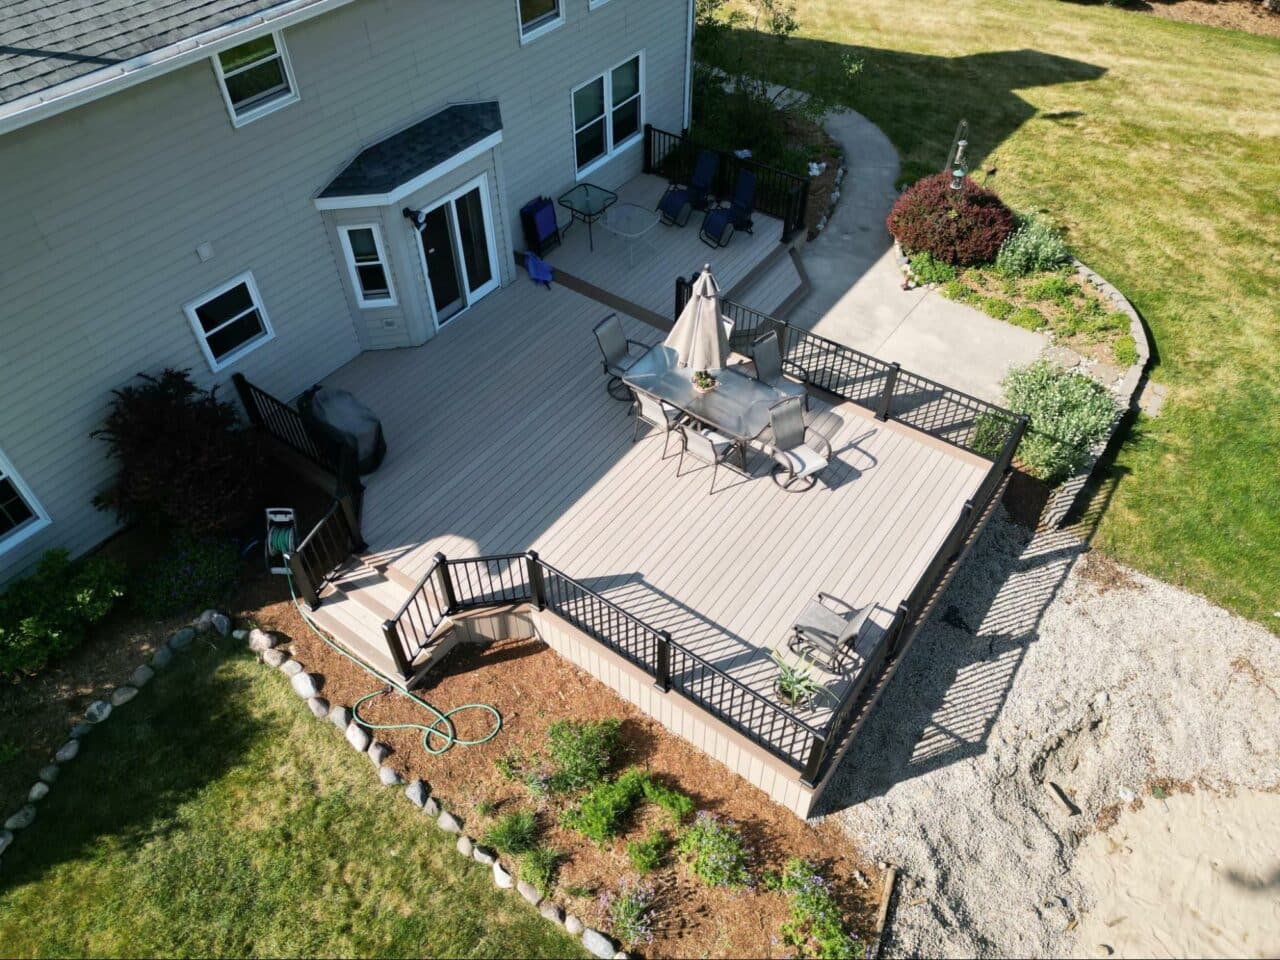 Custom Composite Deck - Custom Deck Railings builder and contractor Services Washington County, WI